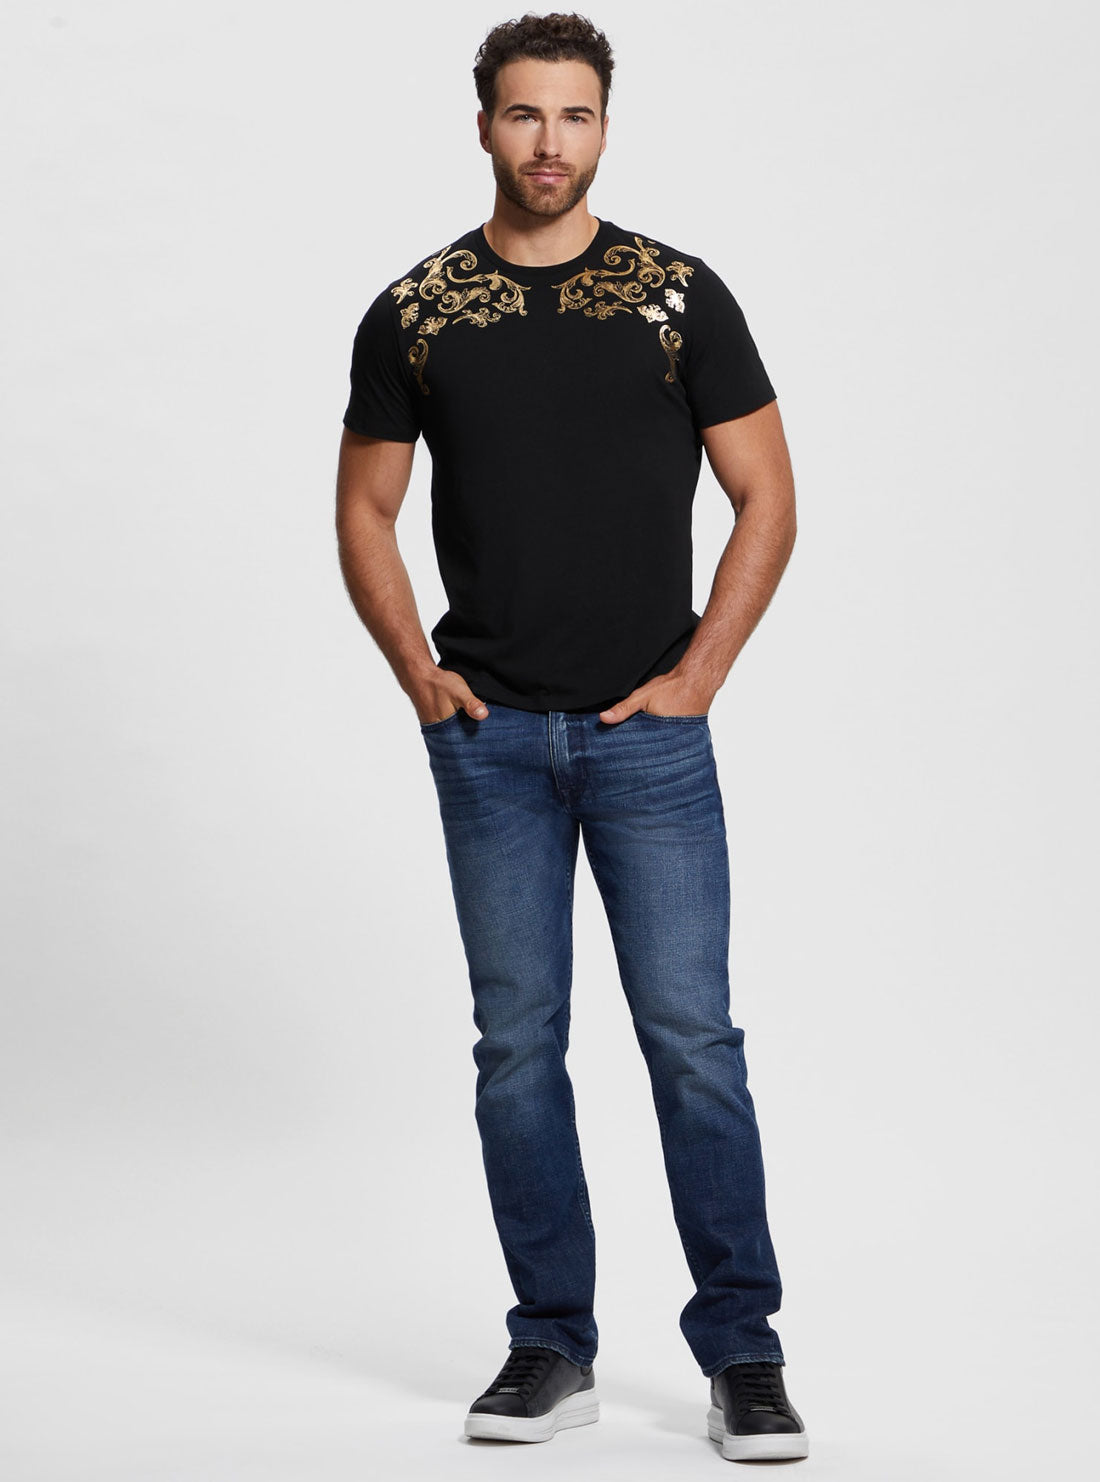 GUESS Black Gold Barque T-Shirt full view